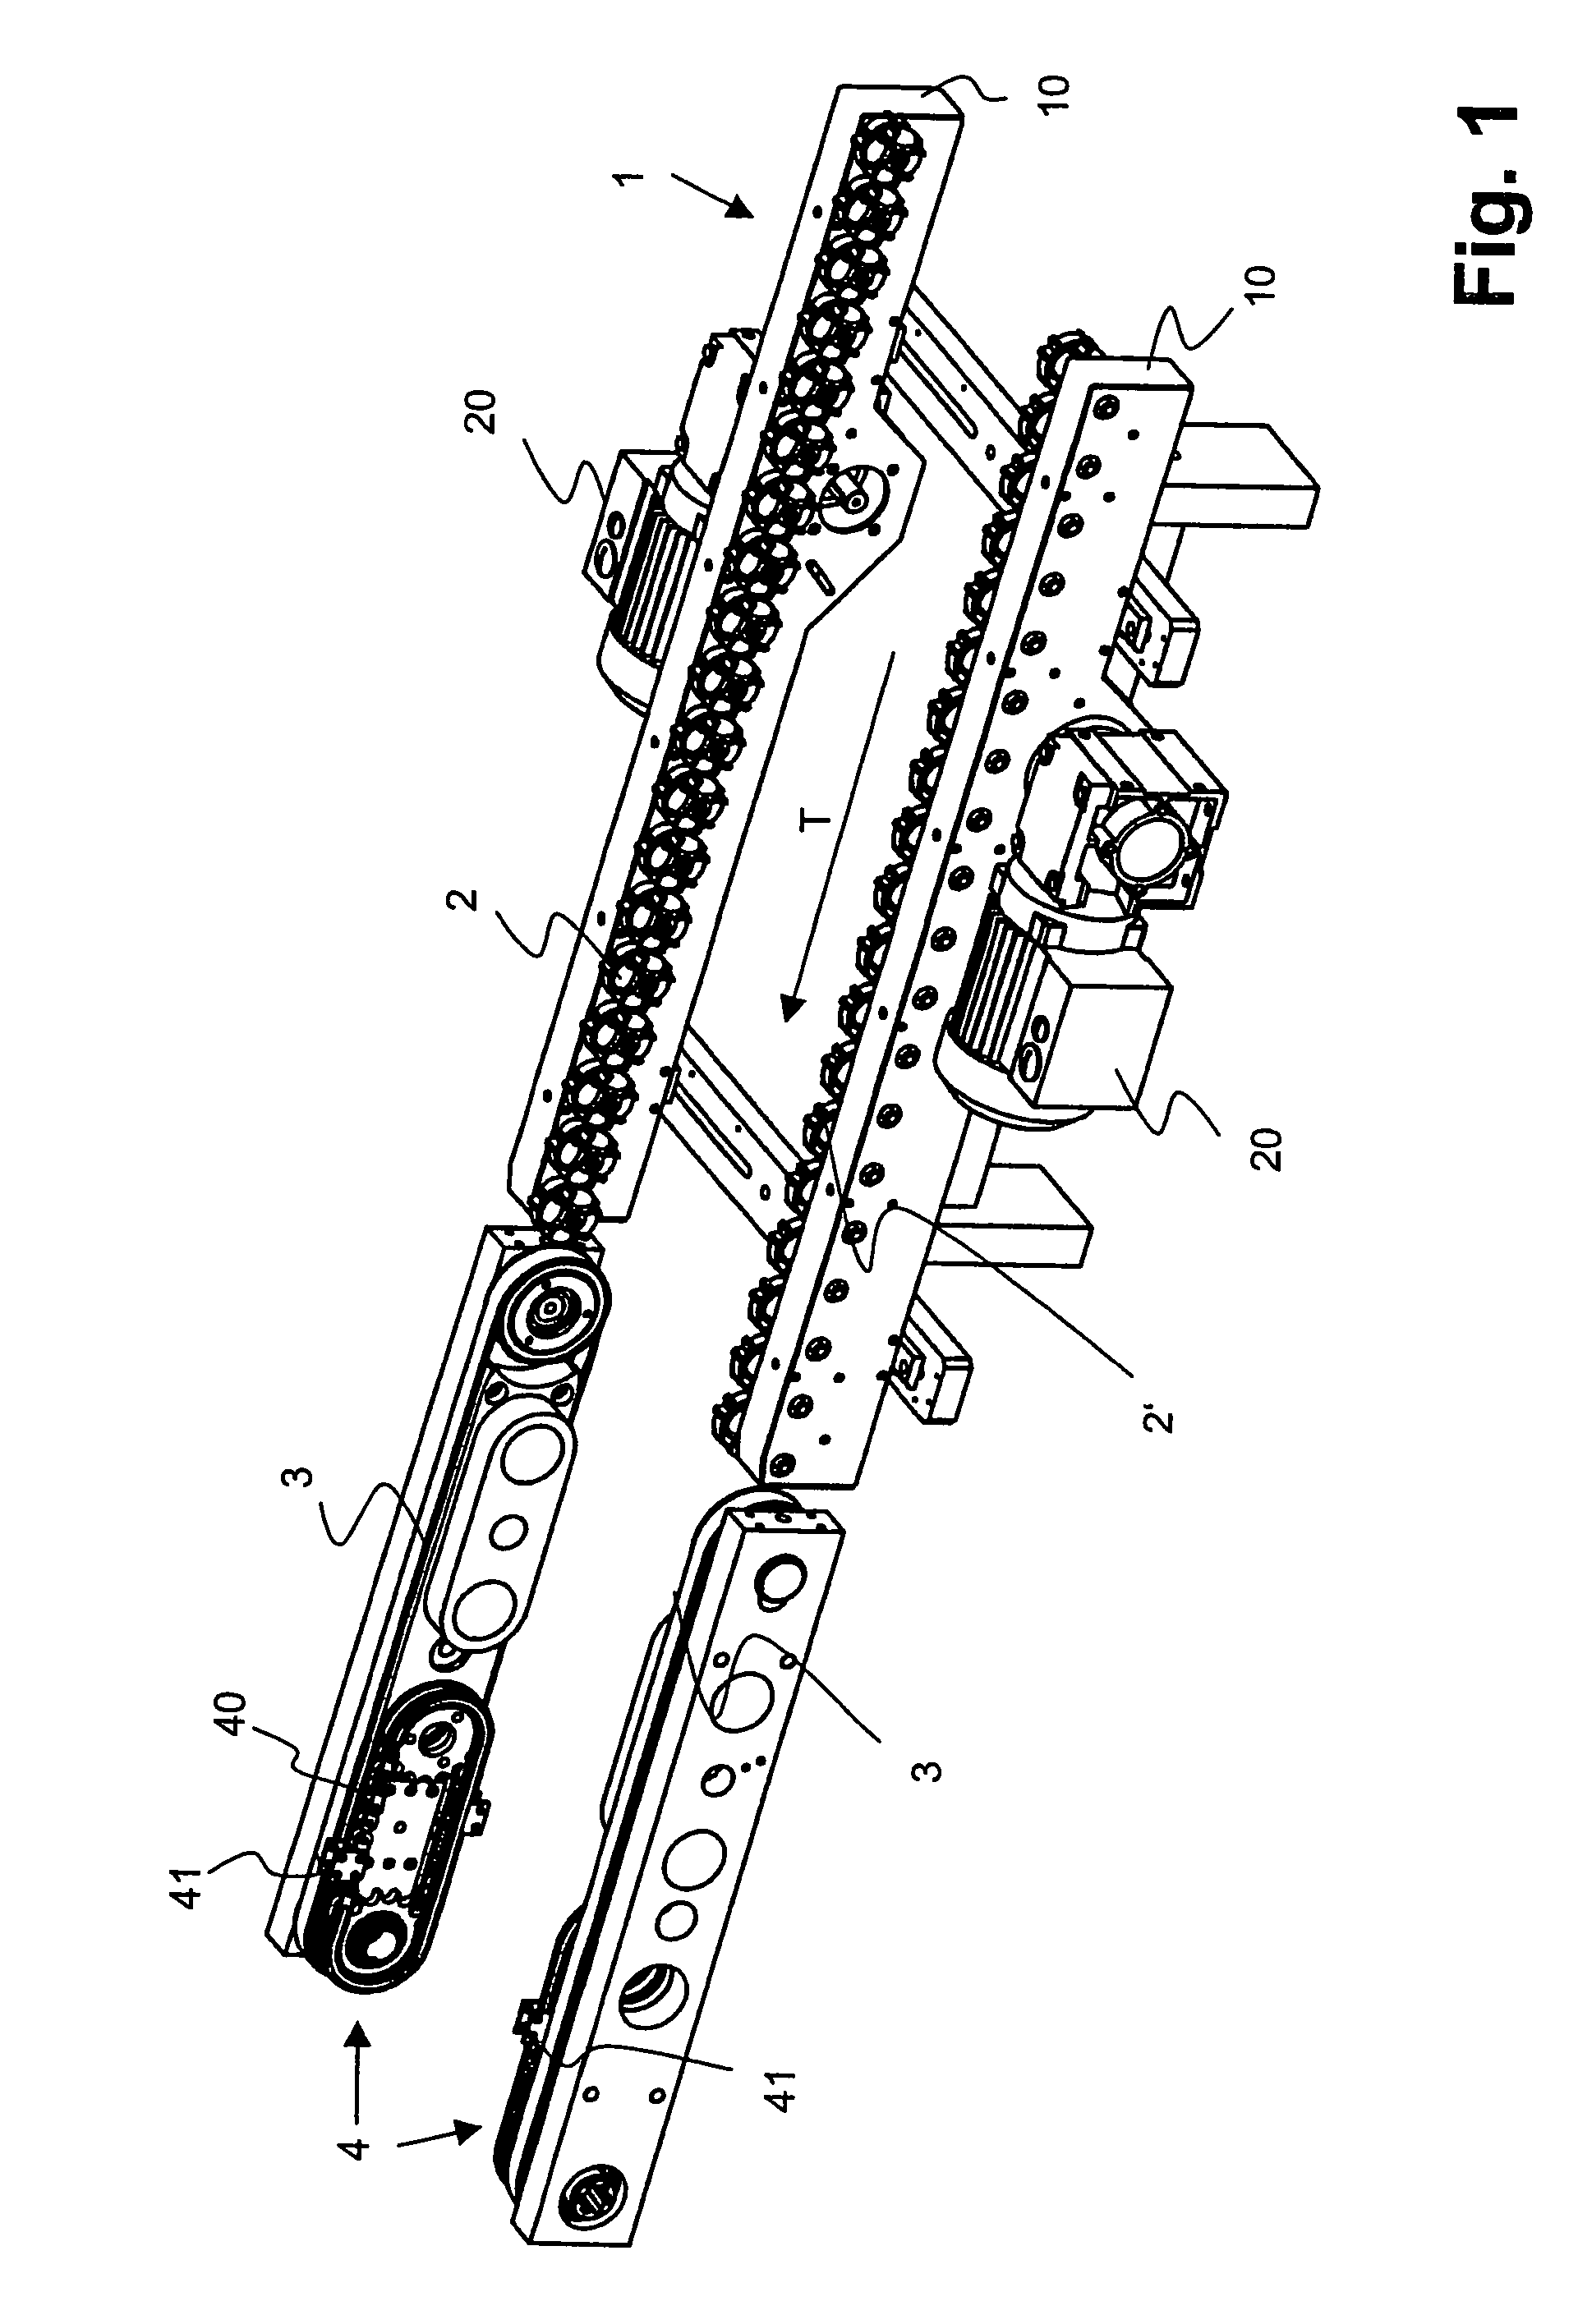 Apparatus for rotating an article